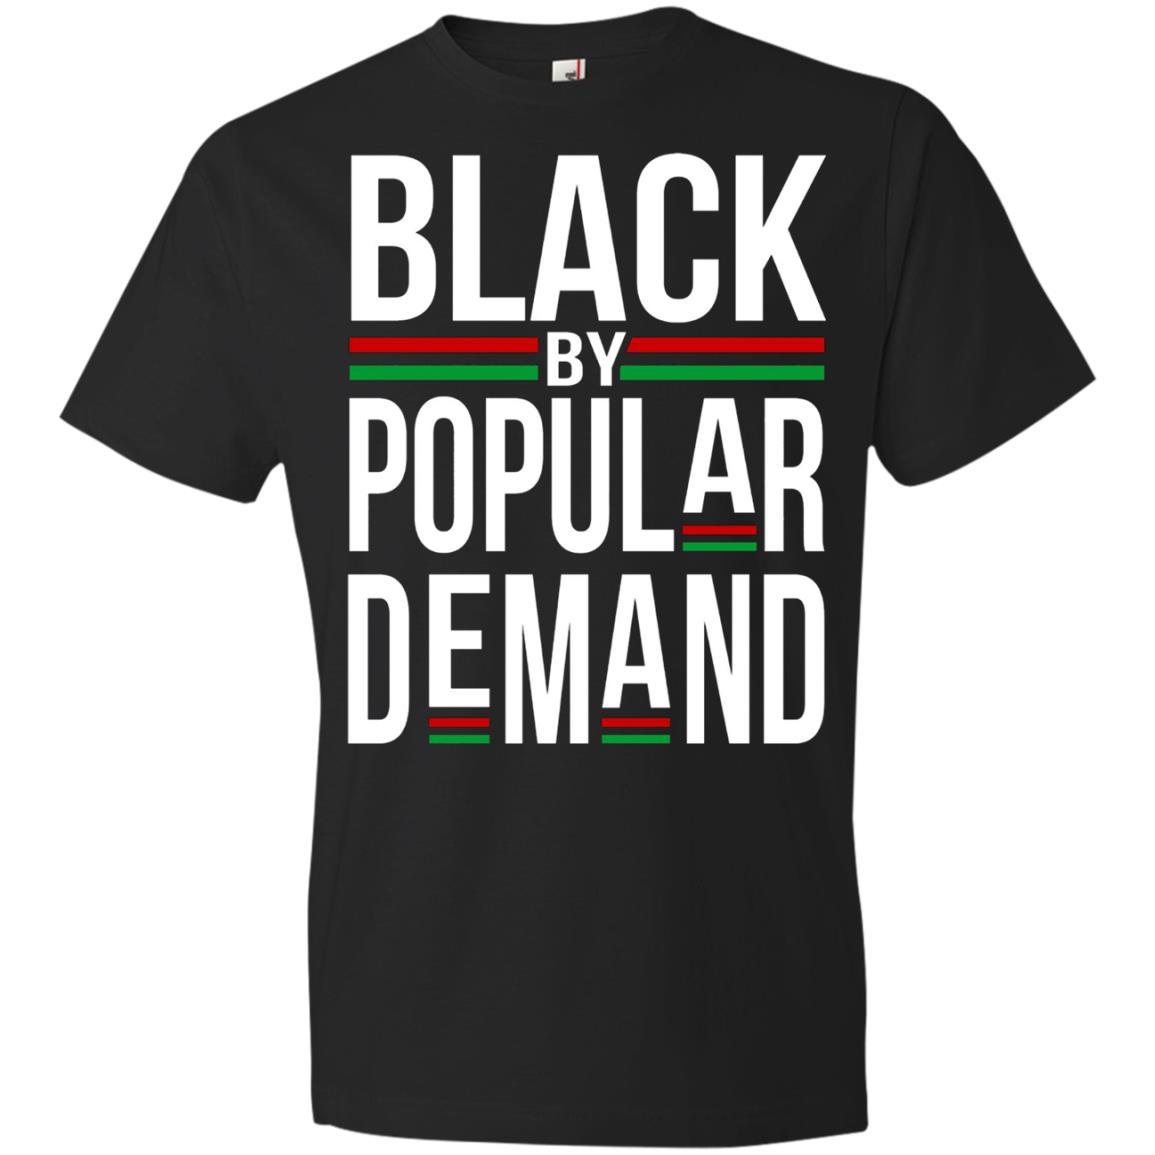 Black by Popular Demand - Cool Black History T shirt Saying - Anvil Lightweight T-Shirt Style / Color / Size